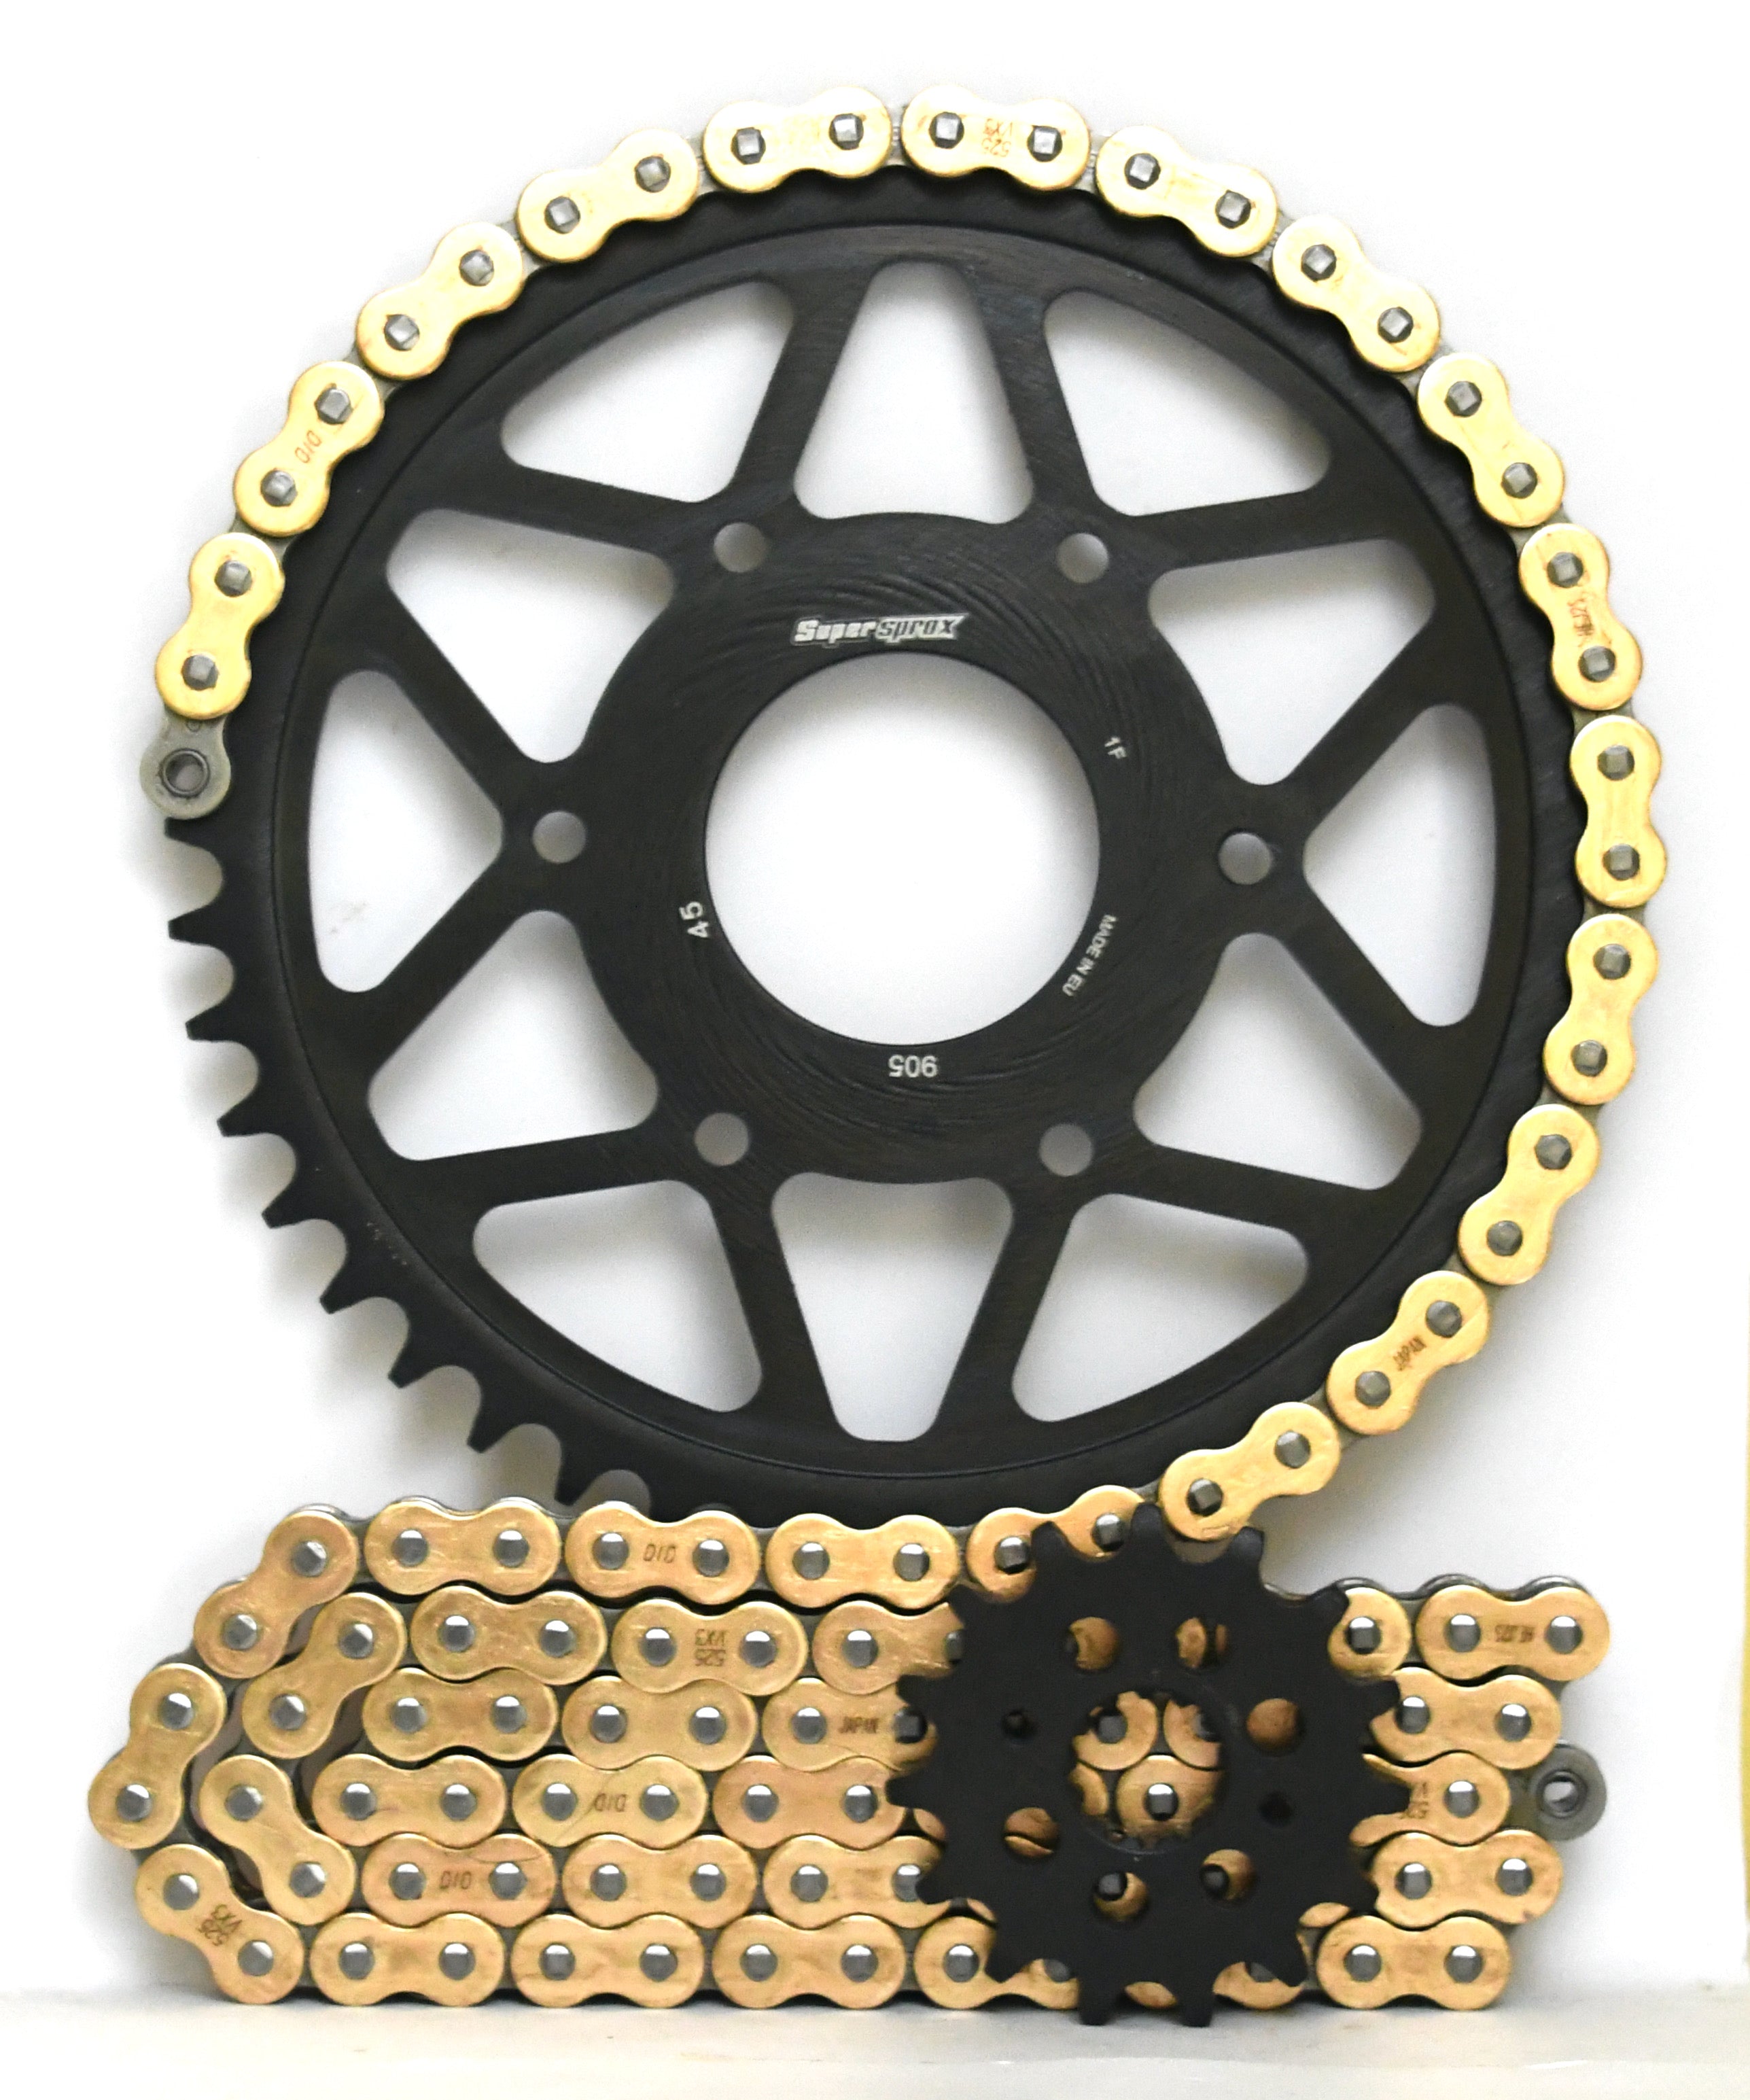 Supersprox Chain & Steel Sprocket Kit for KTM 390 RC and Duke - Standard Gearing